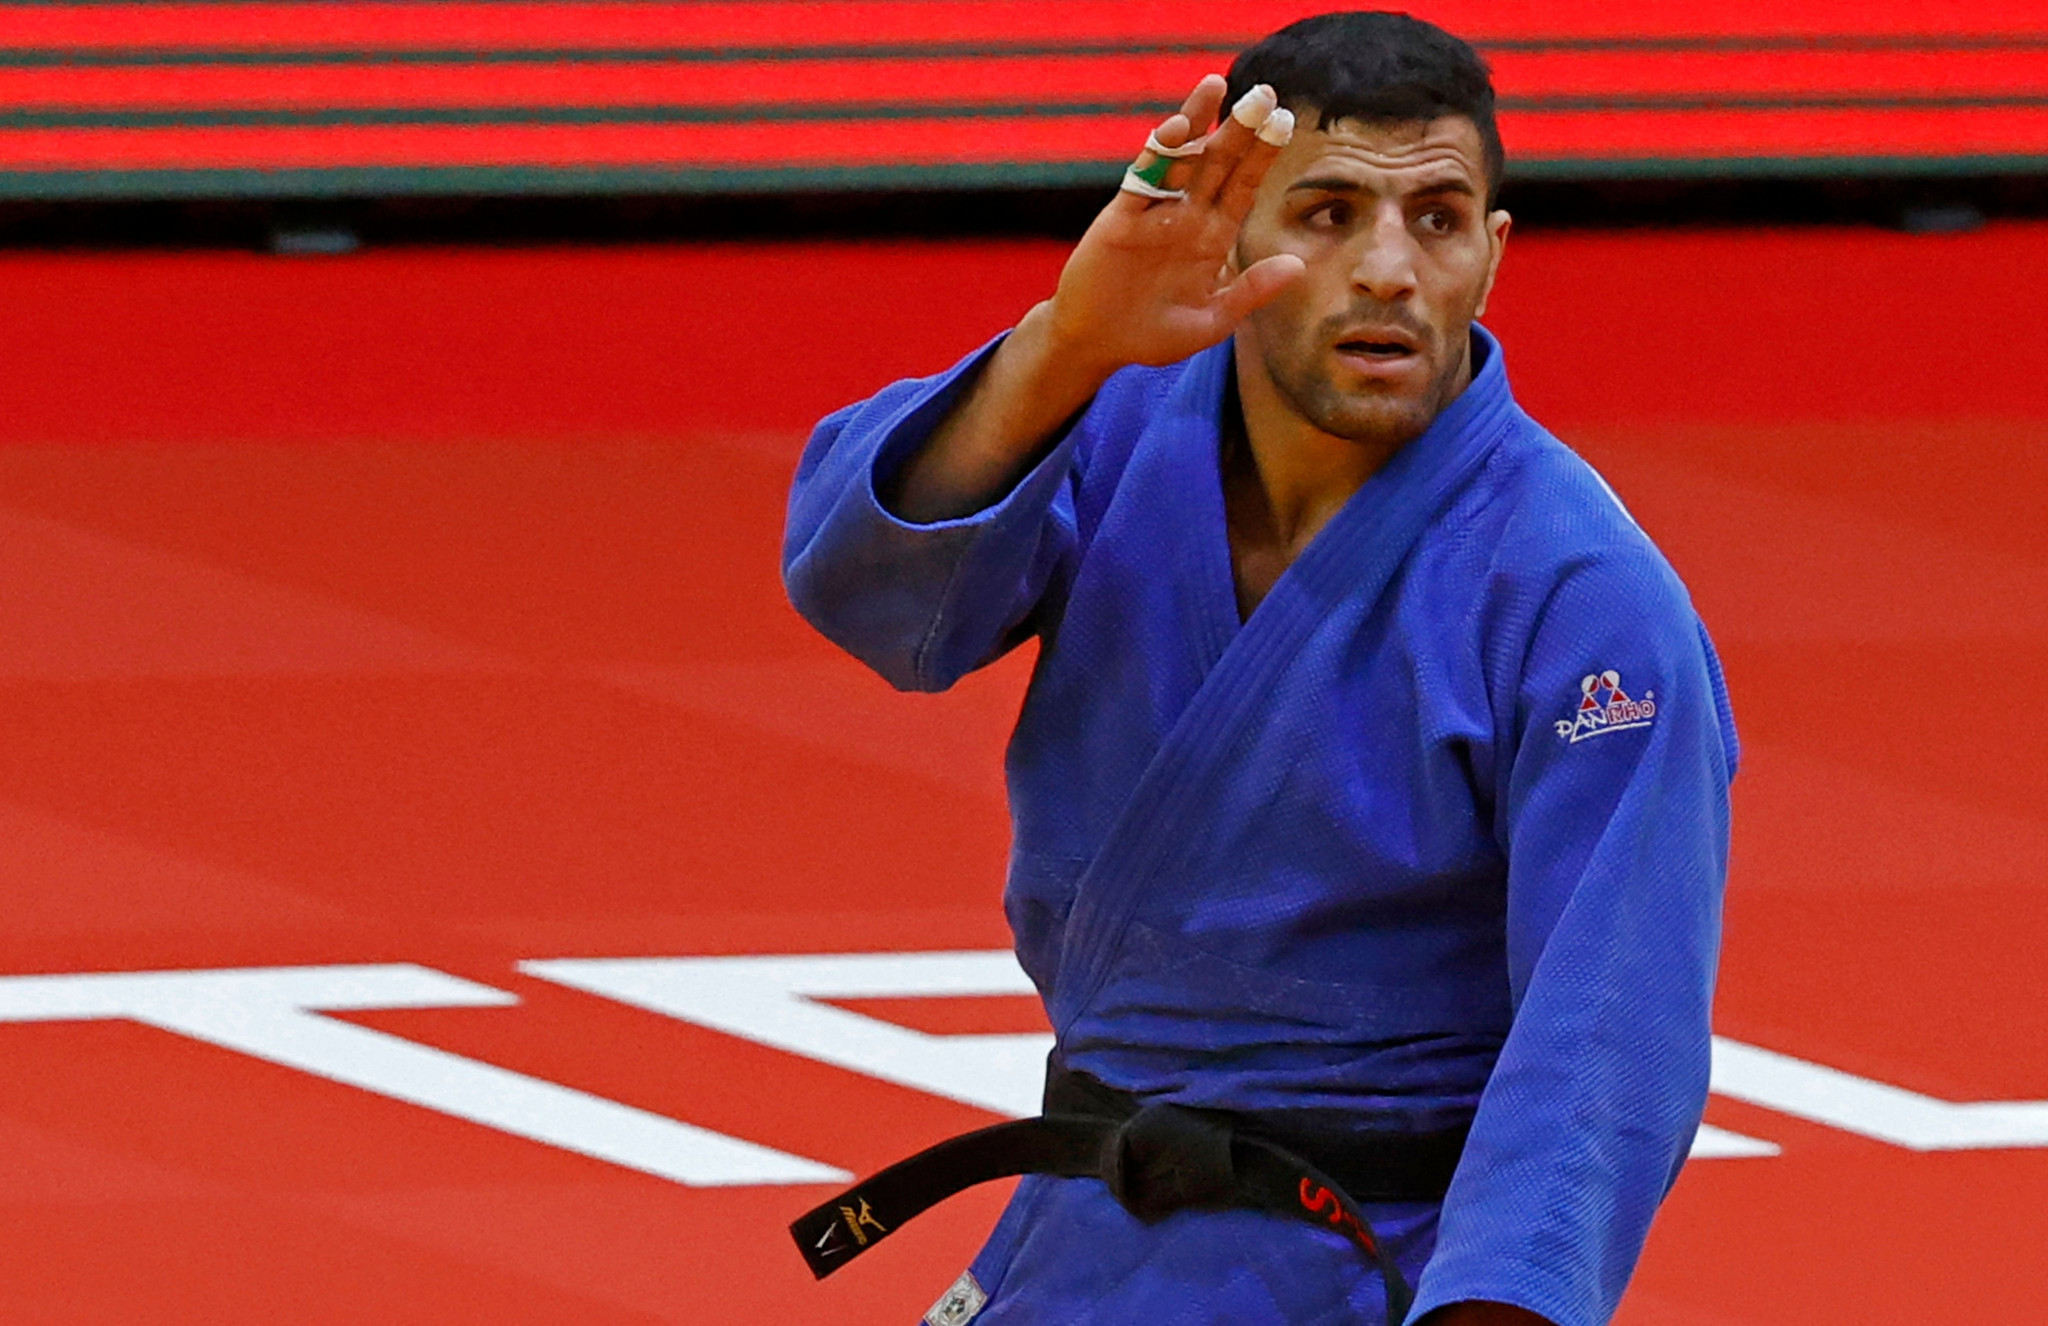 Controversy over Iranian judoka Saeid Mollaei, who was warned by a home Government official not to risk meeting an Israeli opponent at the World Judo Championships, has been one of the controversial issues during Reza Salehi Amiri's four-year tenure as Iran's NOC President ©Getty Images